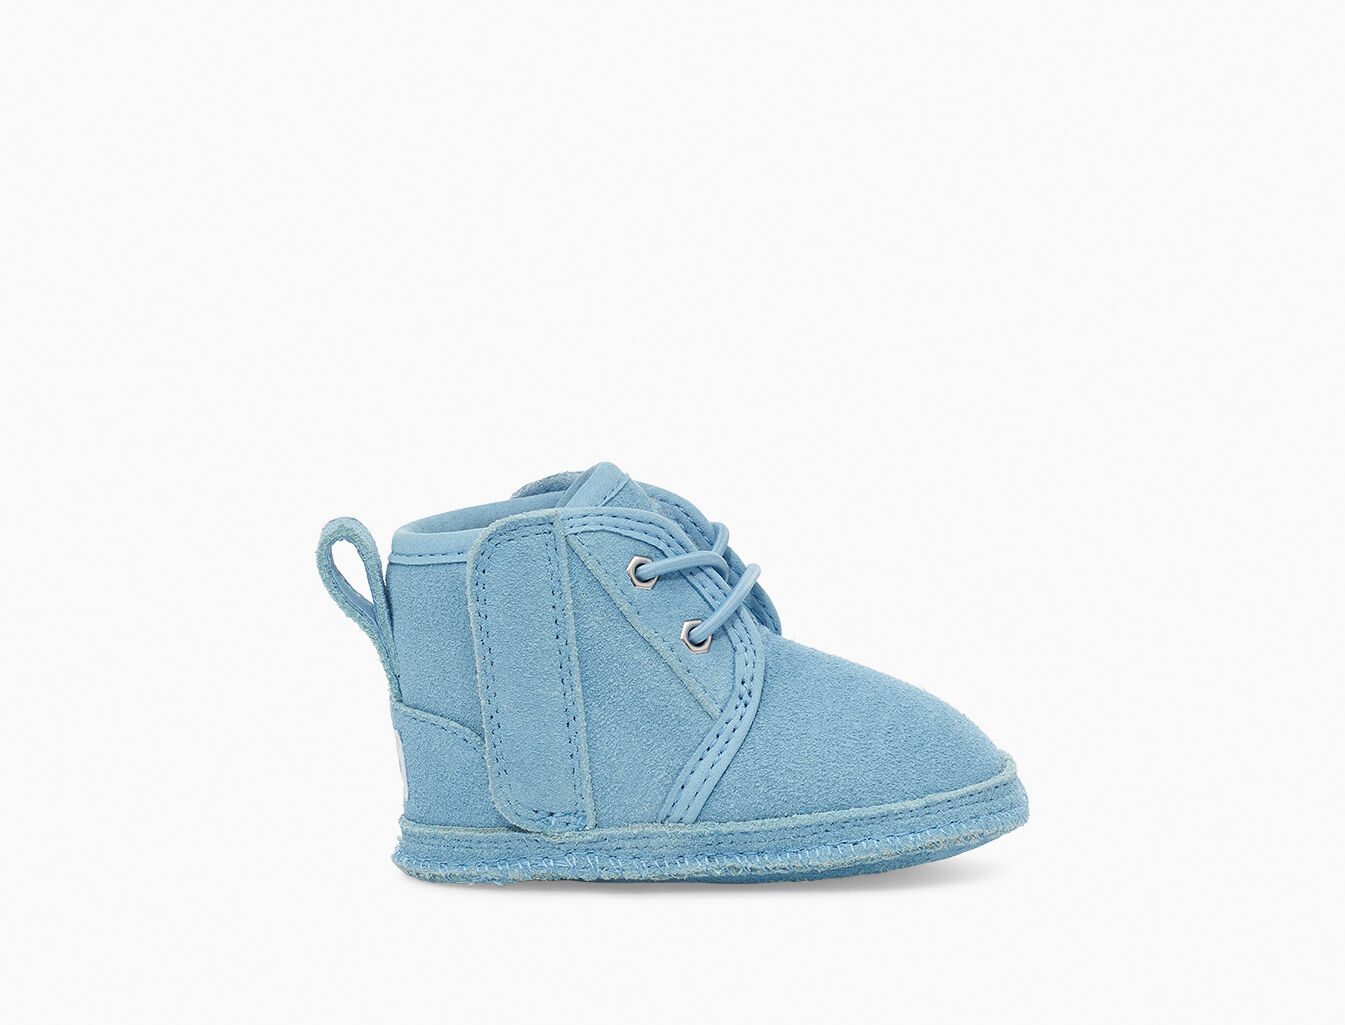 ugg toddler size 6 shoes